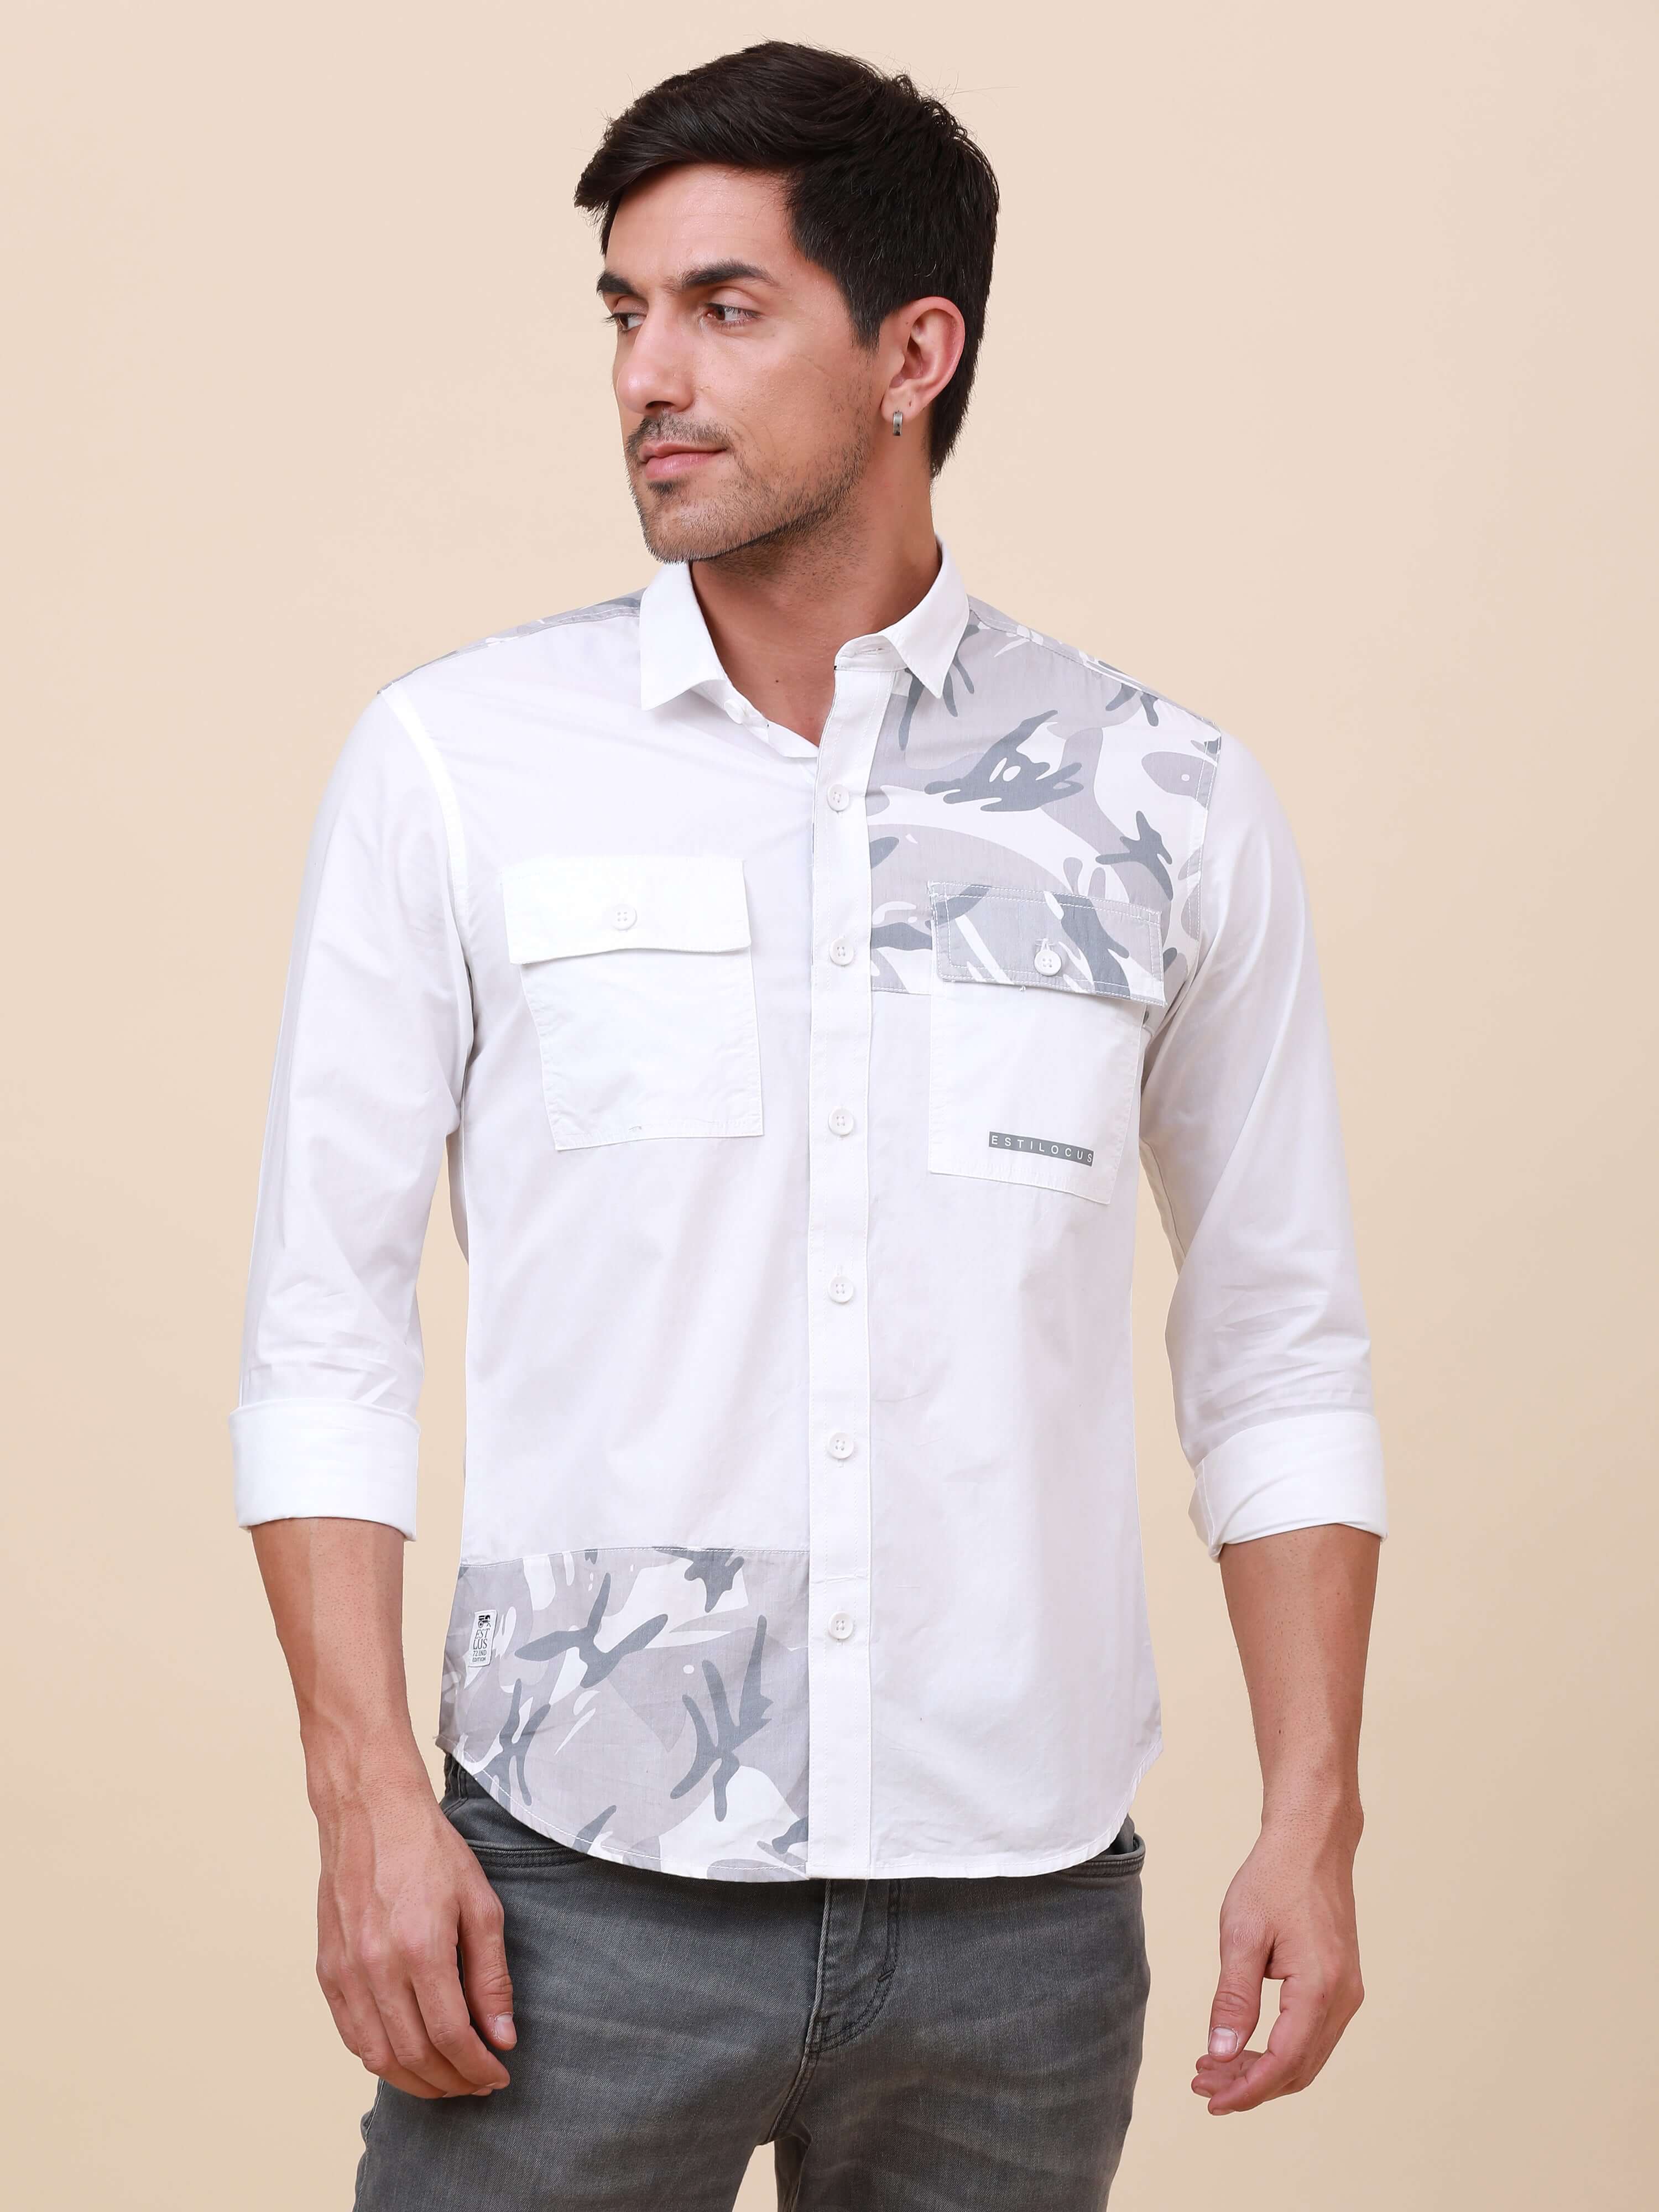 White Camo Solid Single Pocket Shirt shop online at Estilocus. 100% Cotton ,Full-sleeve solid shirt Cut and sew placket. Cut and sew front placket with camo fab Regular collar Double button edge cuff Double pocket with flap Curved bottom hemline Finest pr